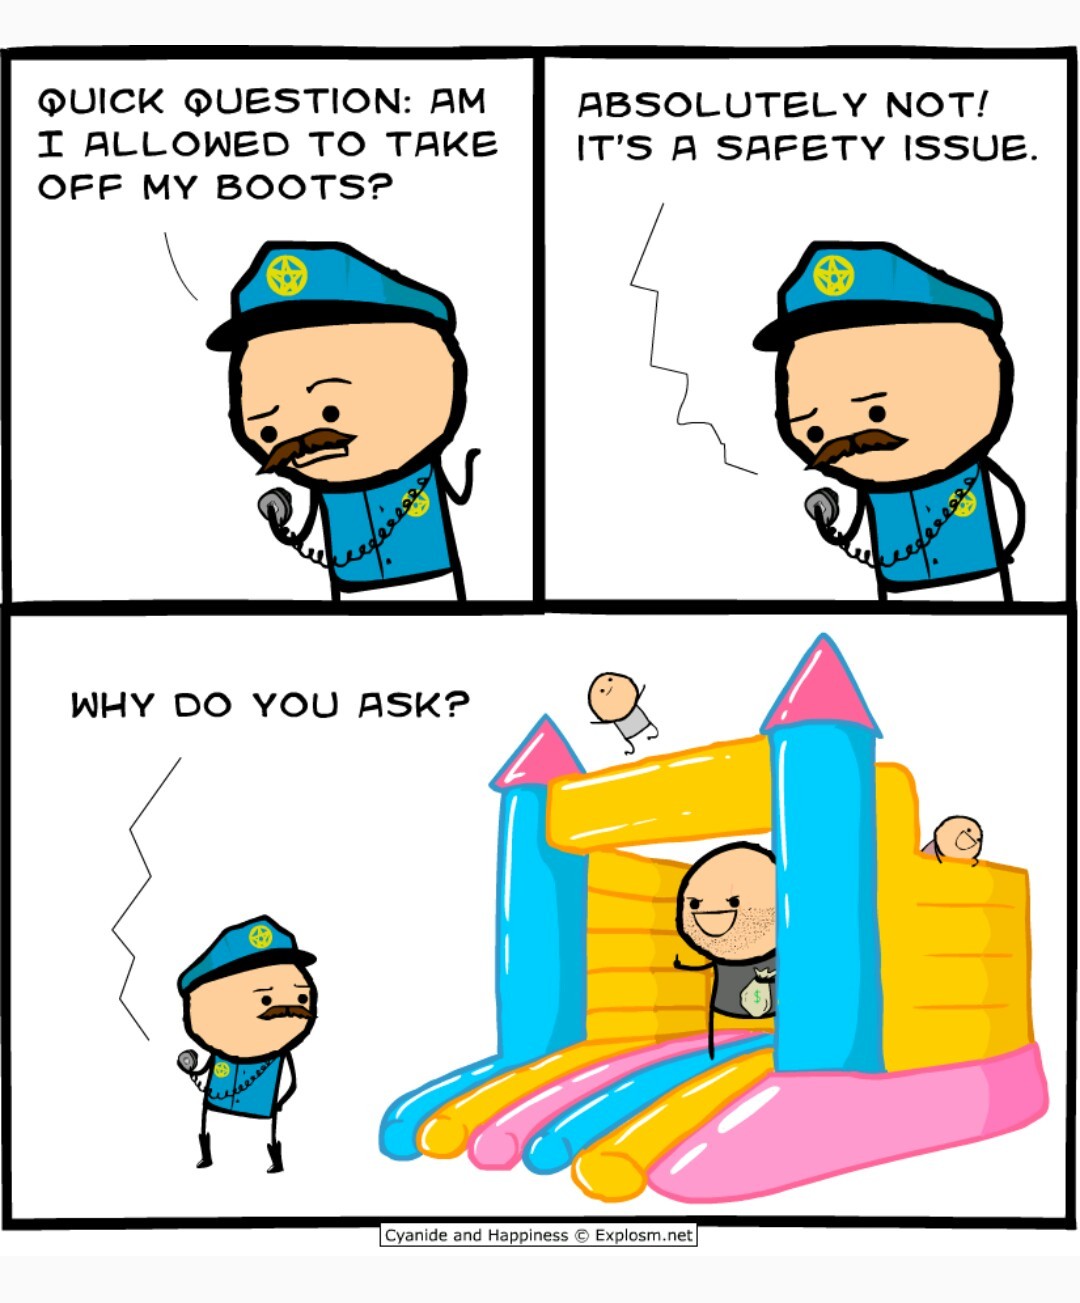 Credit: cyanide and happiness - meme